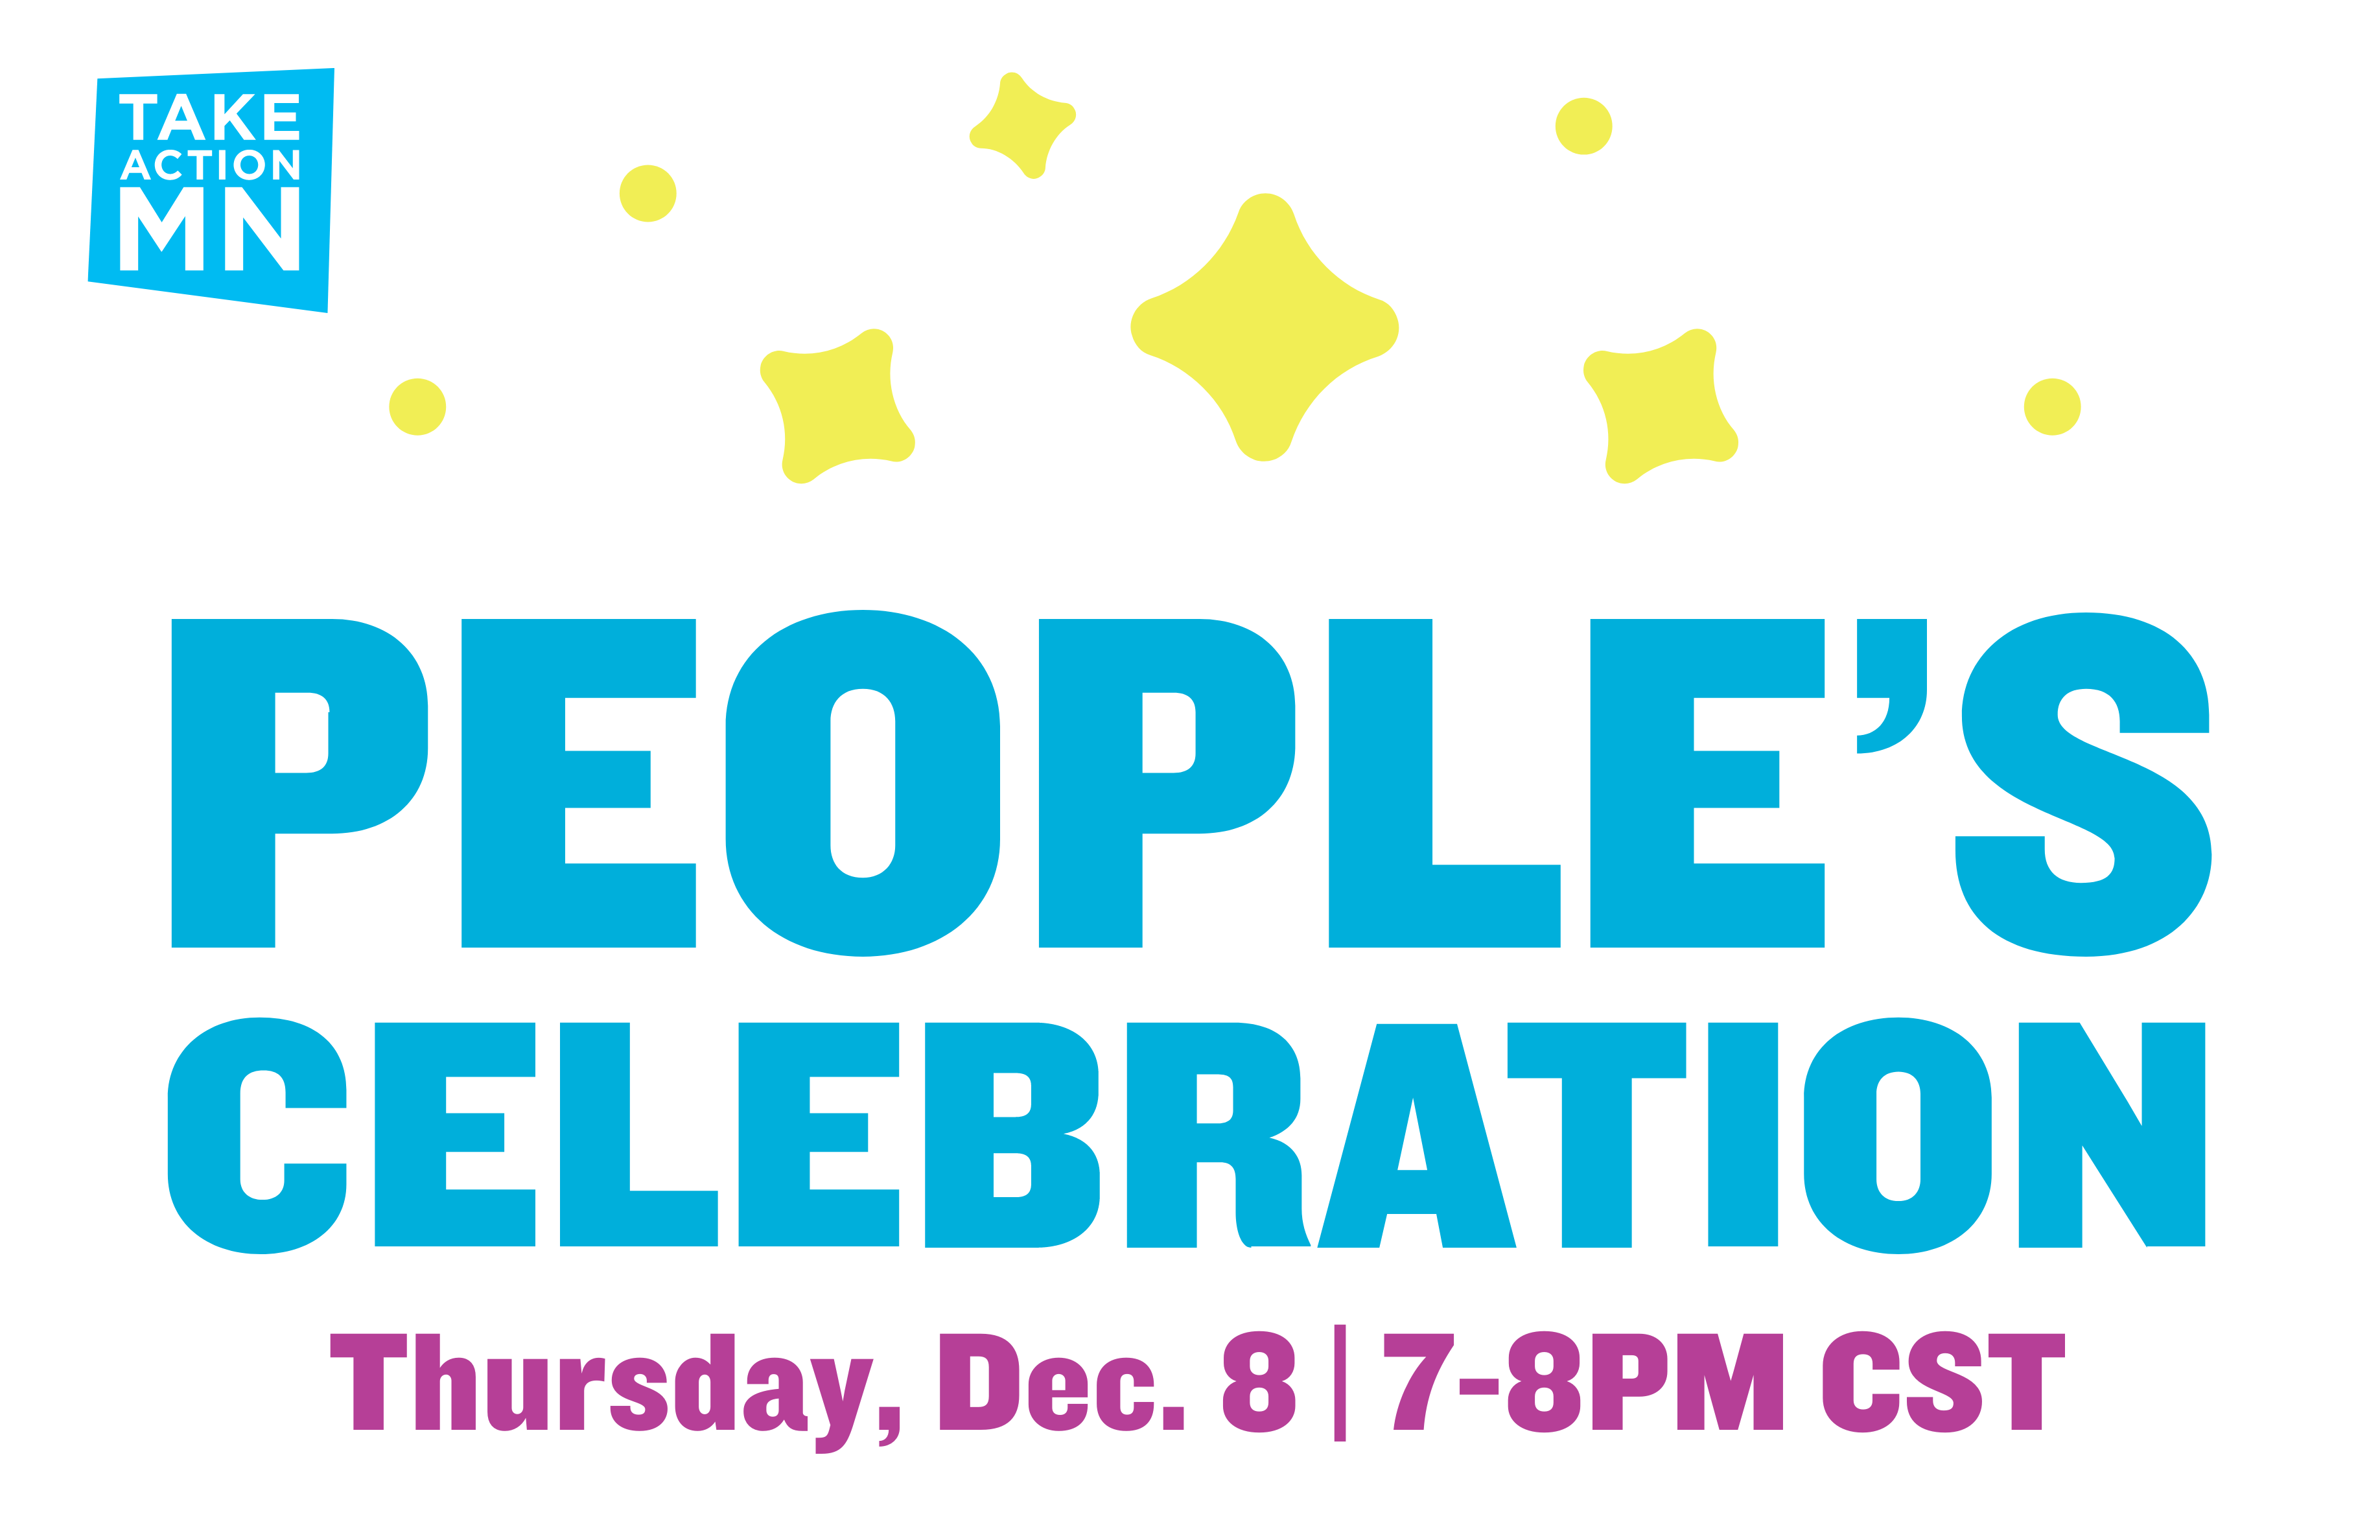 Graphic image: White background with yellow sparkles and the TakeAction Minnesota logo. Light blue text says "People's Celebration," with "Thursday, Dec. 8 | 7-8pm CST in purple text.